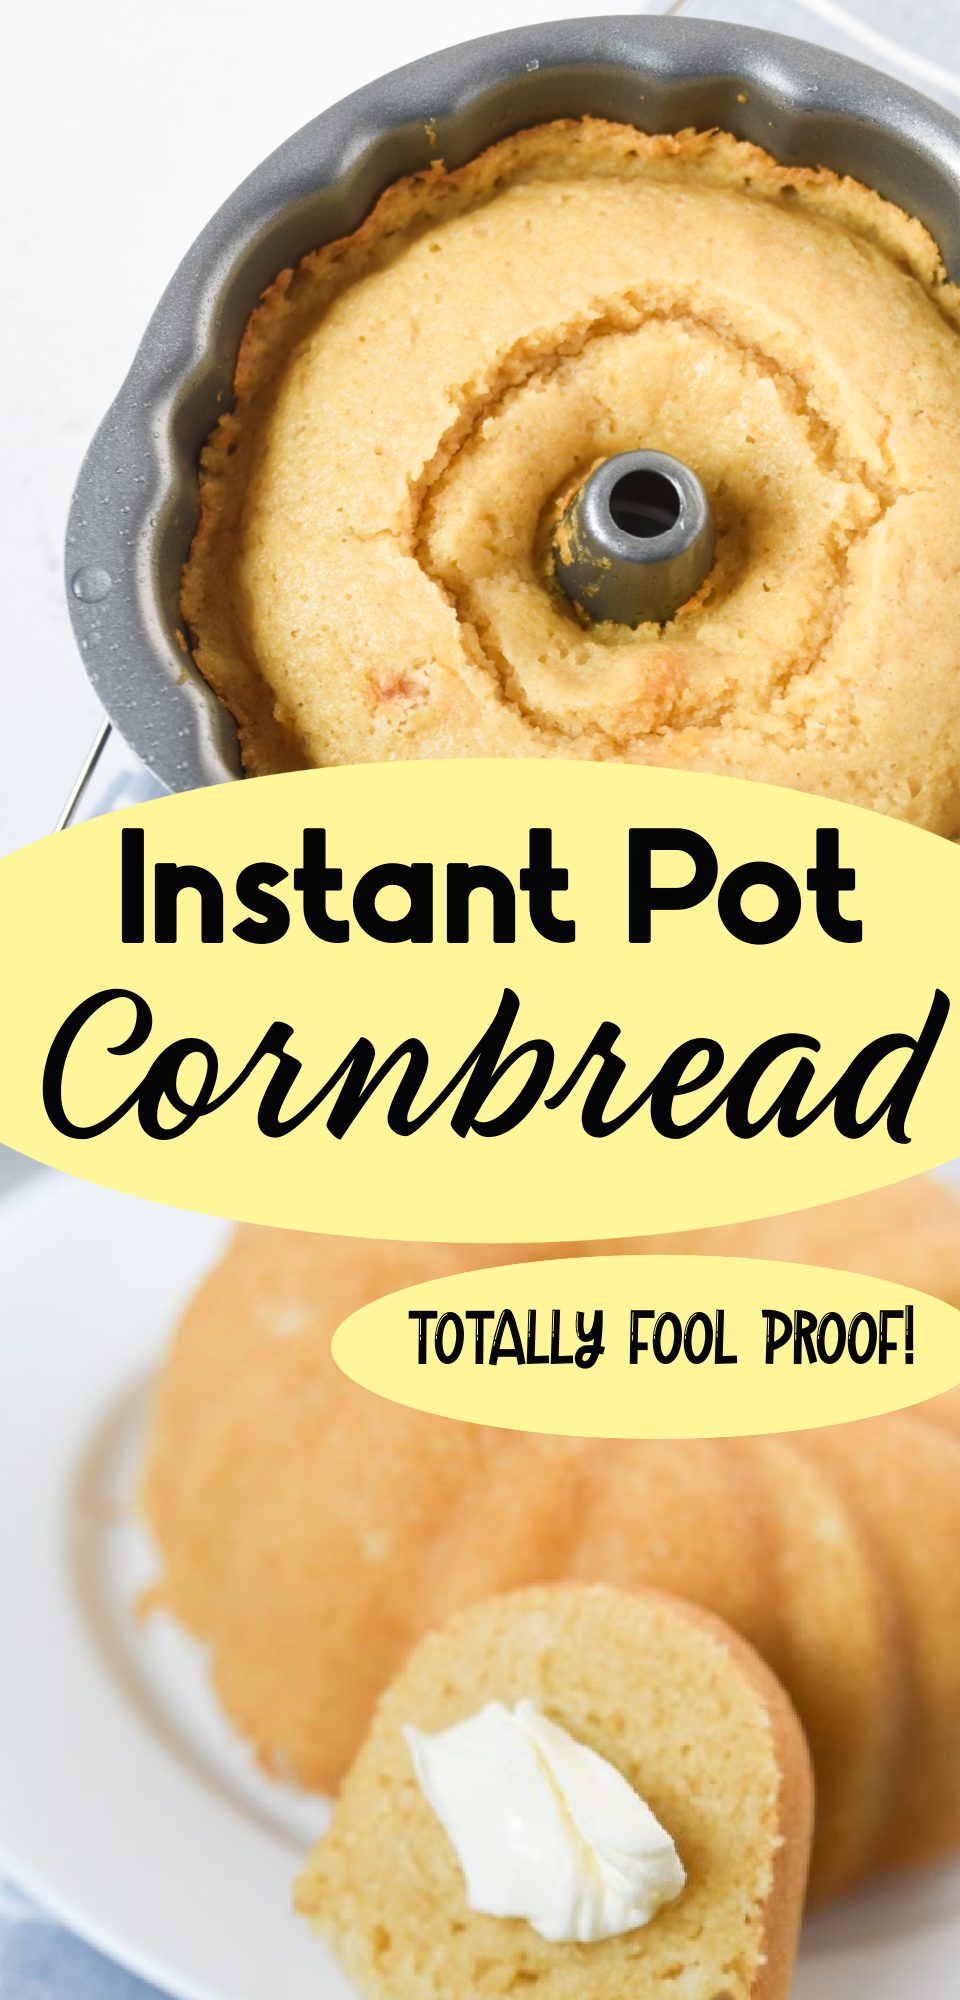 Did you know you can make moist buttermilk cornbread in an Instant Pot? It's the perfect side dish that complements ANY home-cooked meal. You'll love this Instant Pot Cornbread recipe!